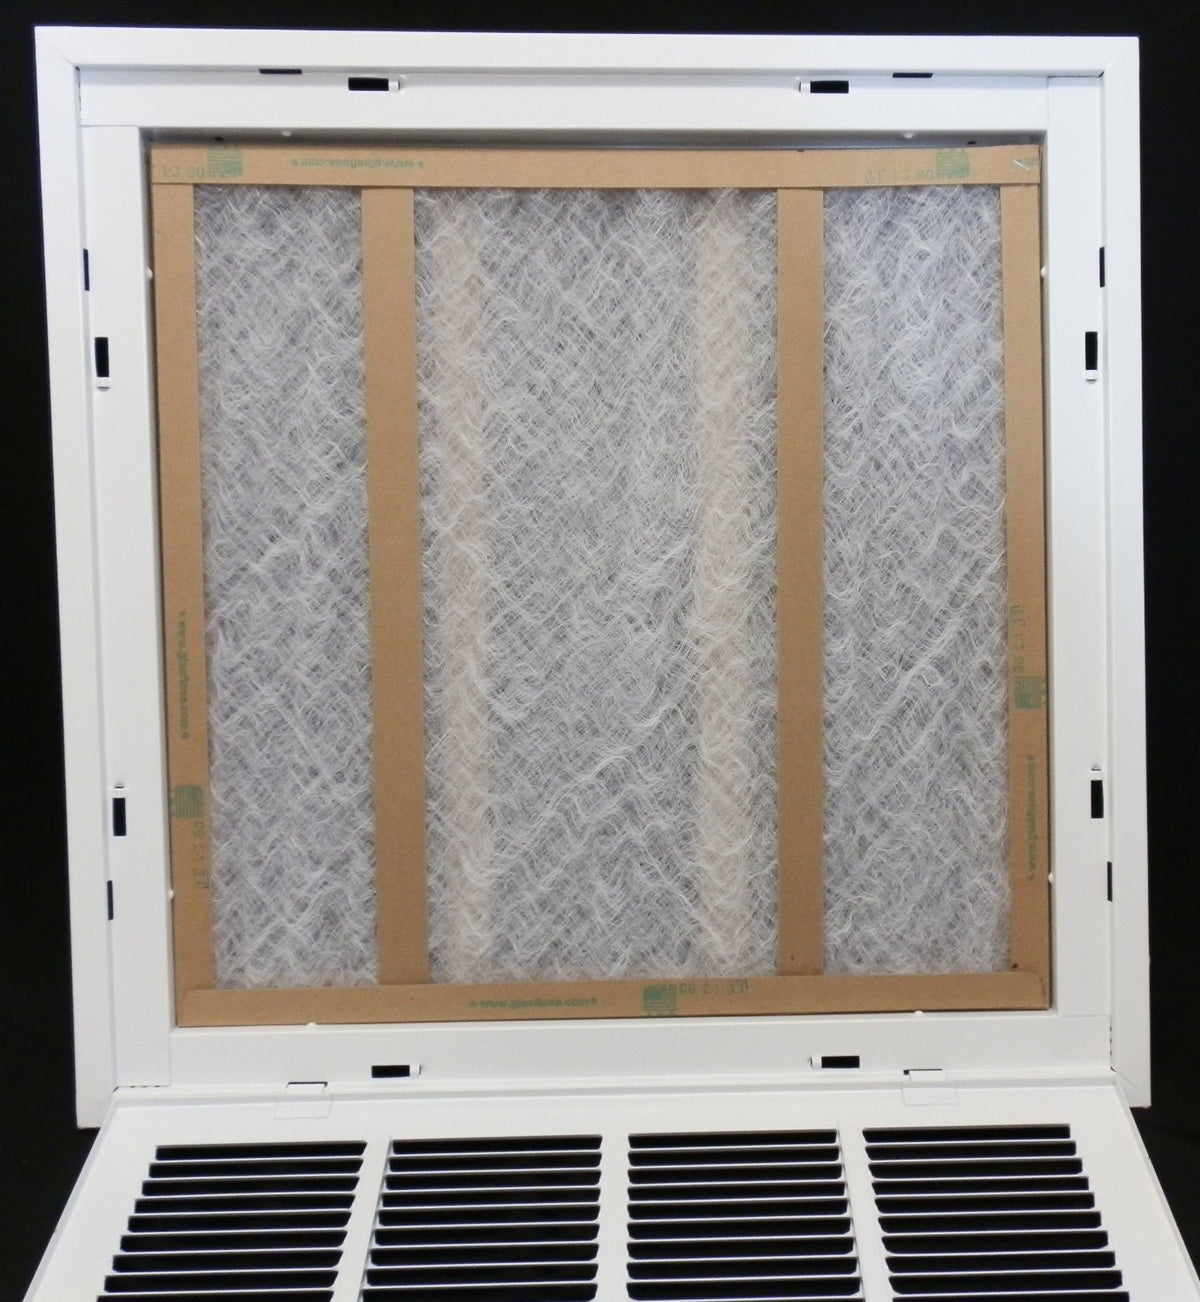 20&quot; X 25&quot; Steel Return Air Filter Grille for 1&quot; Filter - Removable Frame - [Outer Dimensions: 22 5/8&quot; X 27 5/8&quot;]